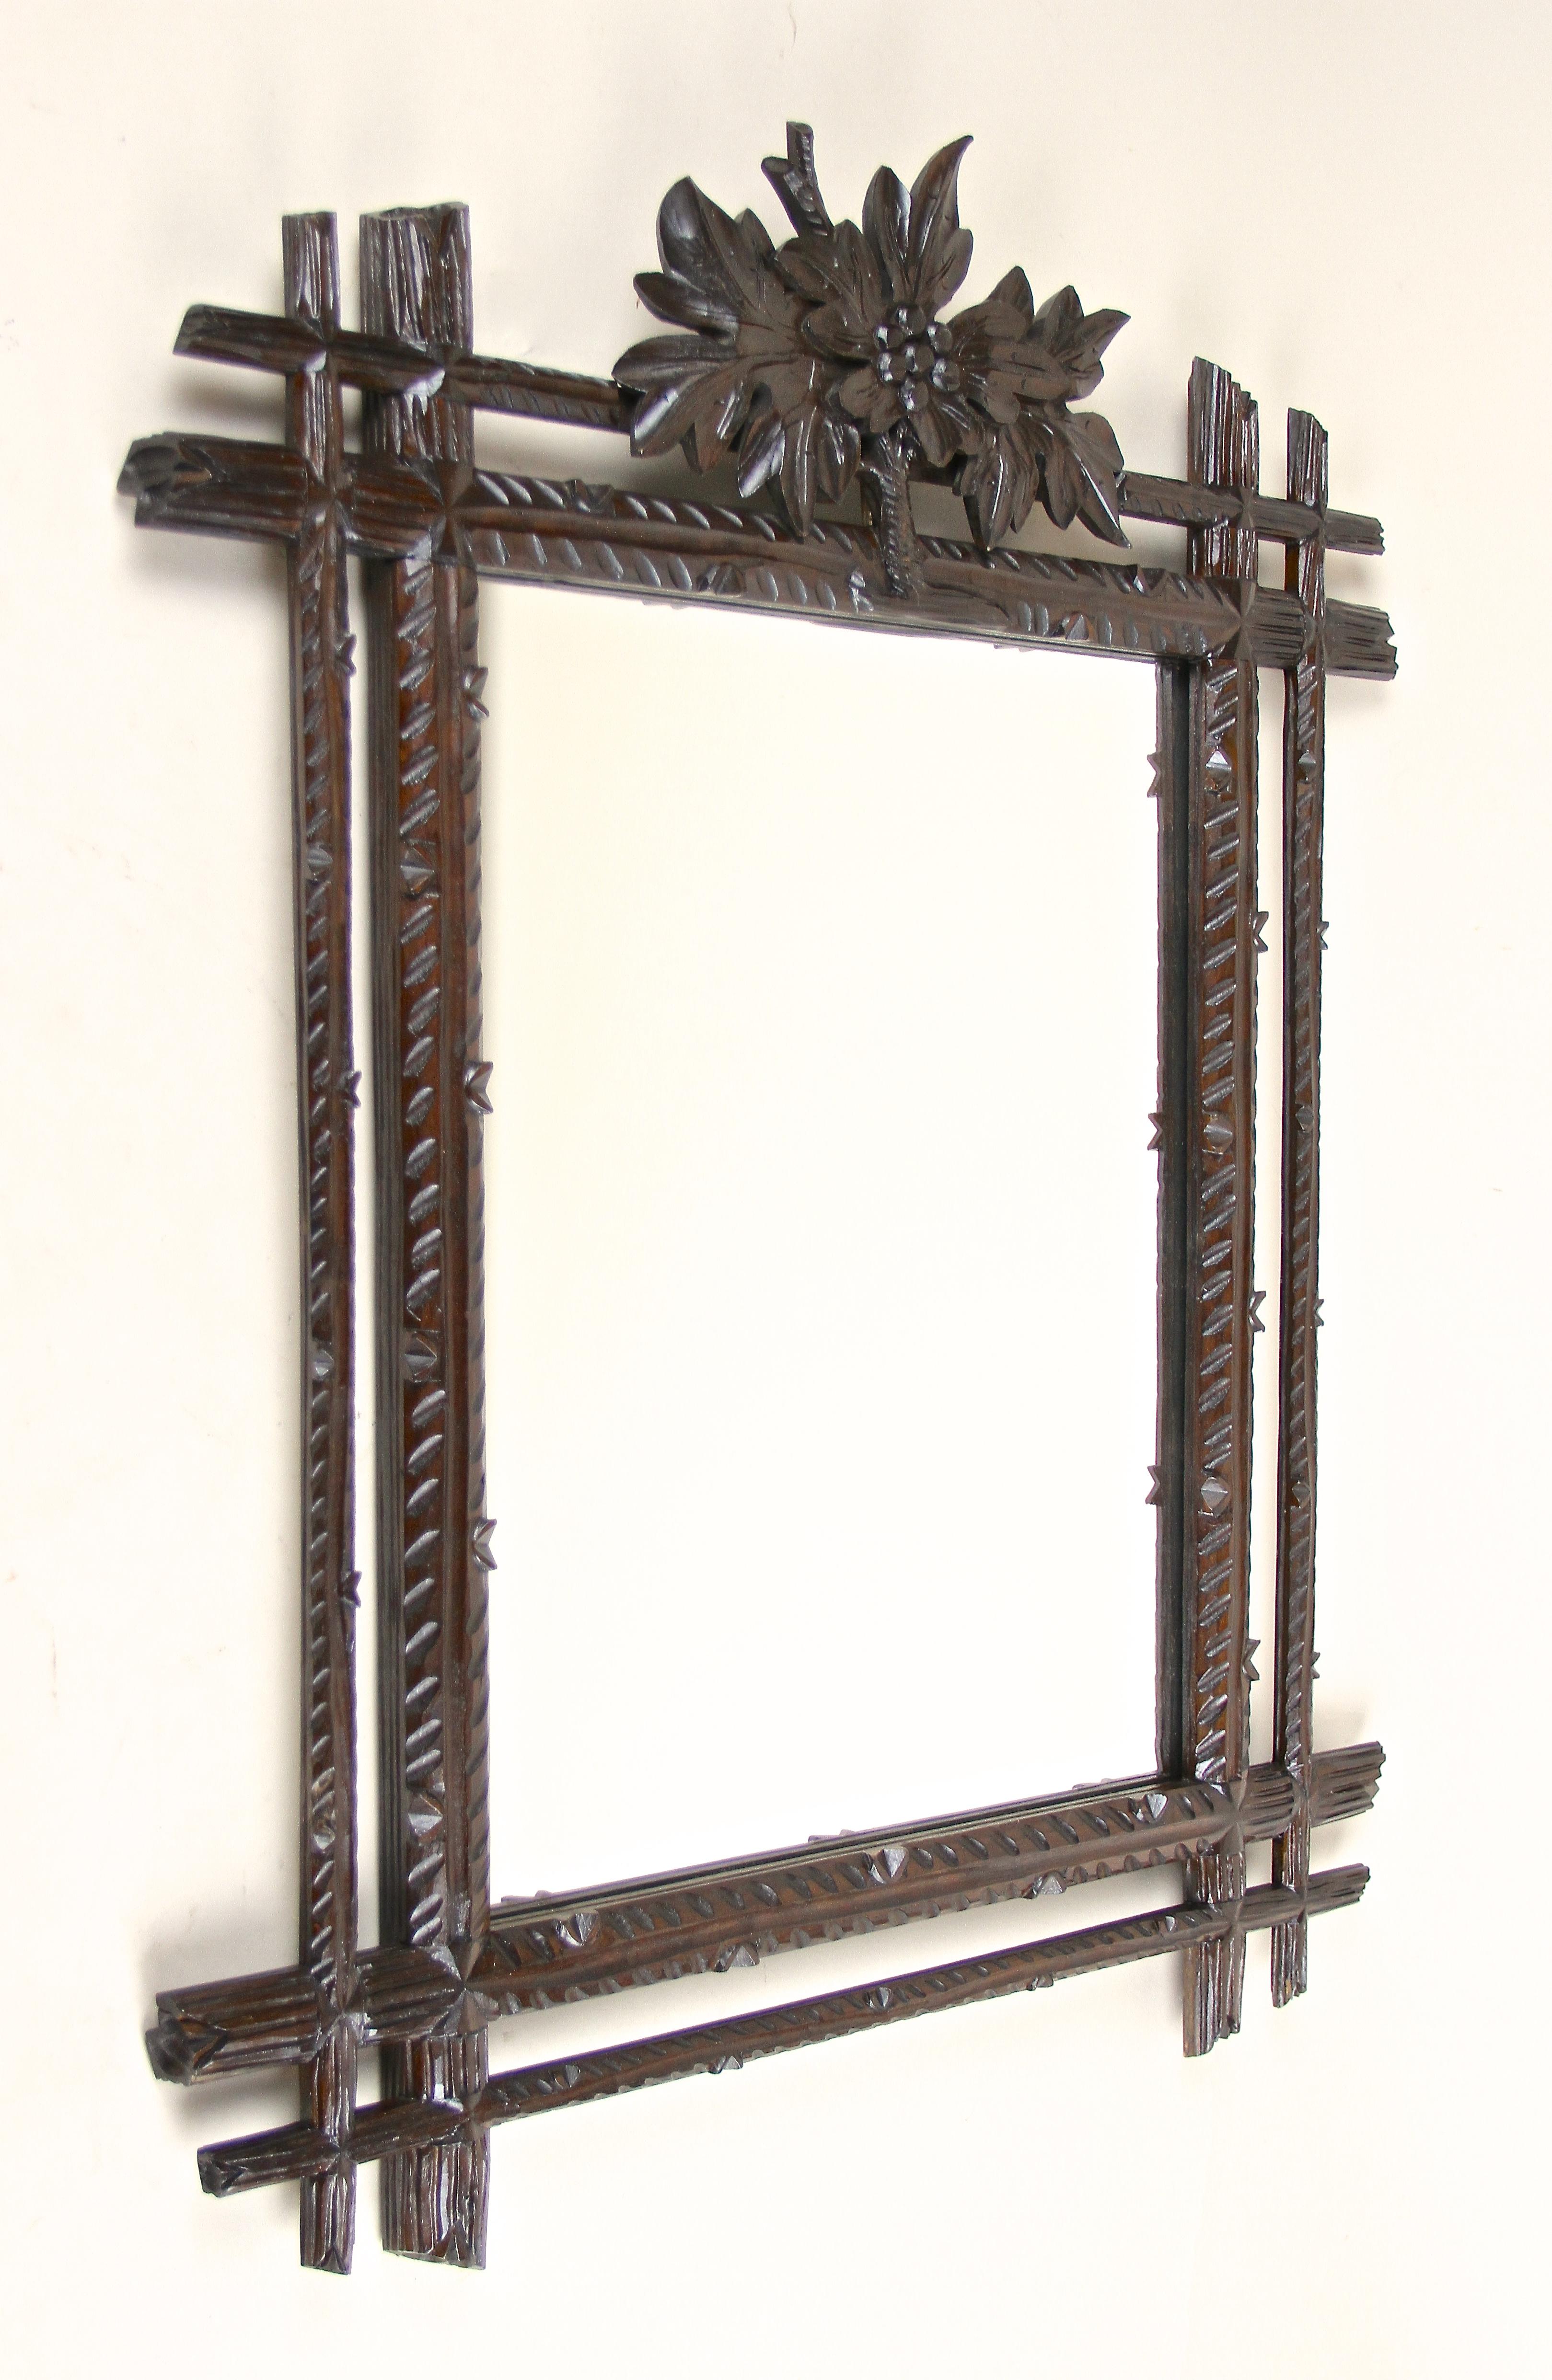 Outstanding rustic Black Forest wall mirror from the late 19th century in Austria. Hand carved out of fine basswood circa 1890 this rural mirror shows an absolute mesmerizing design. The doubled frame with protruding corners impresses with a unique